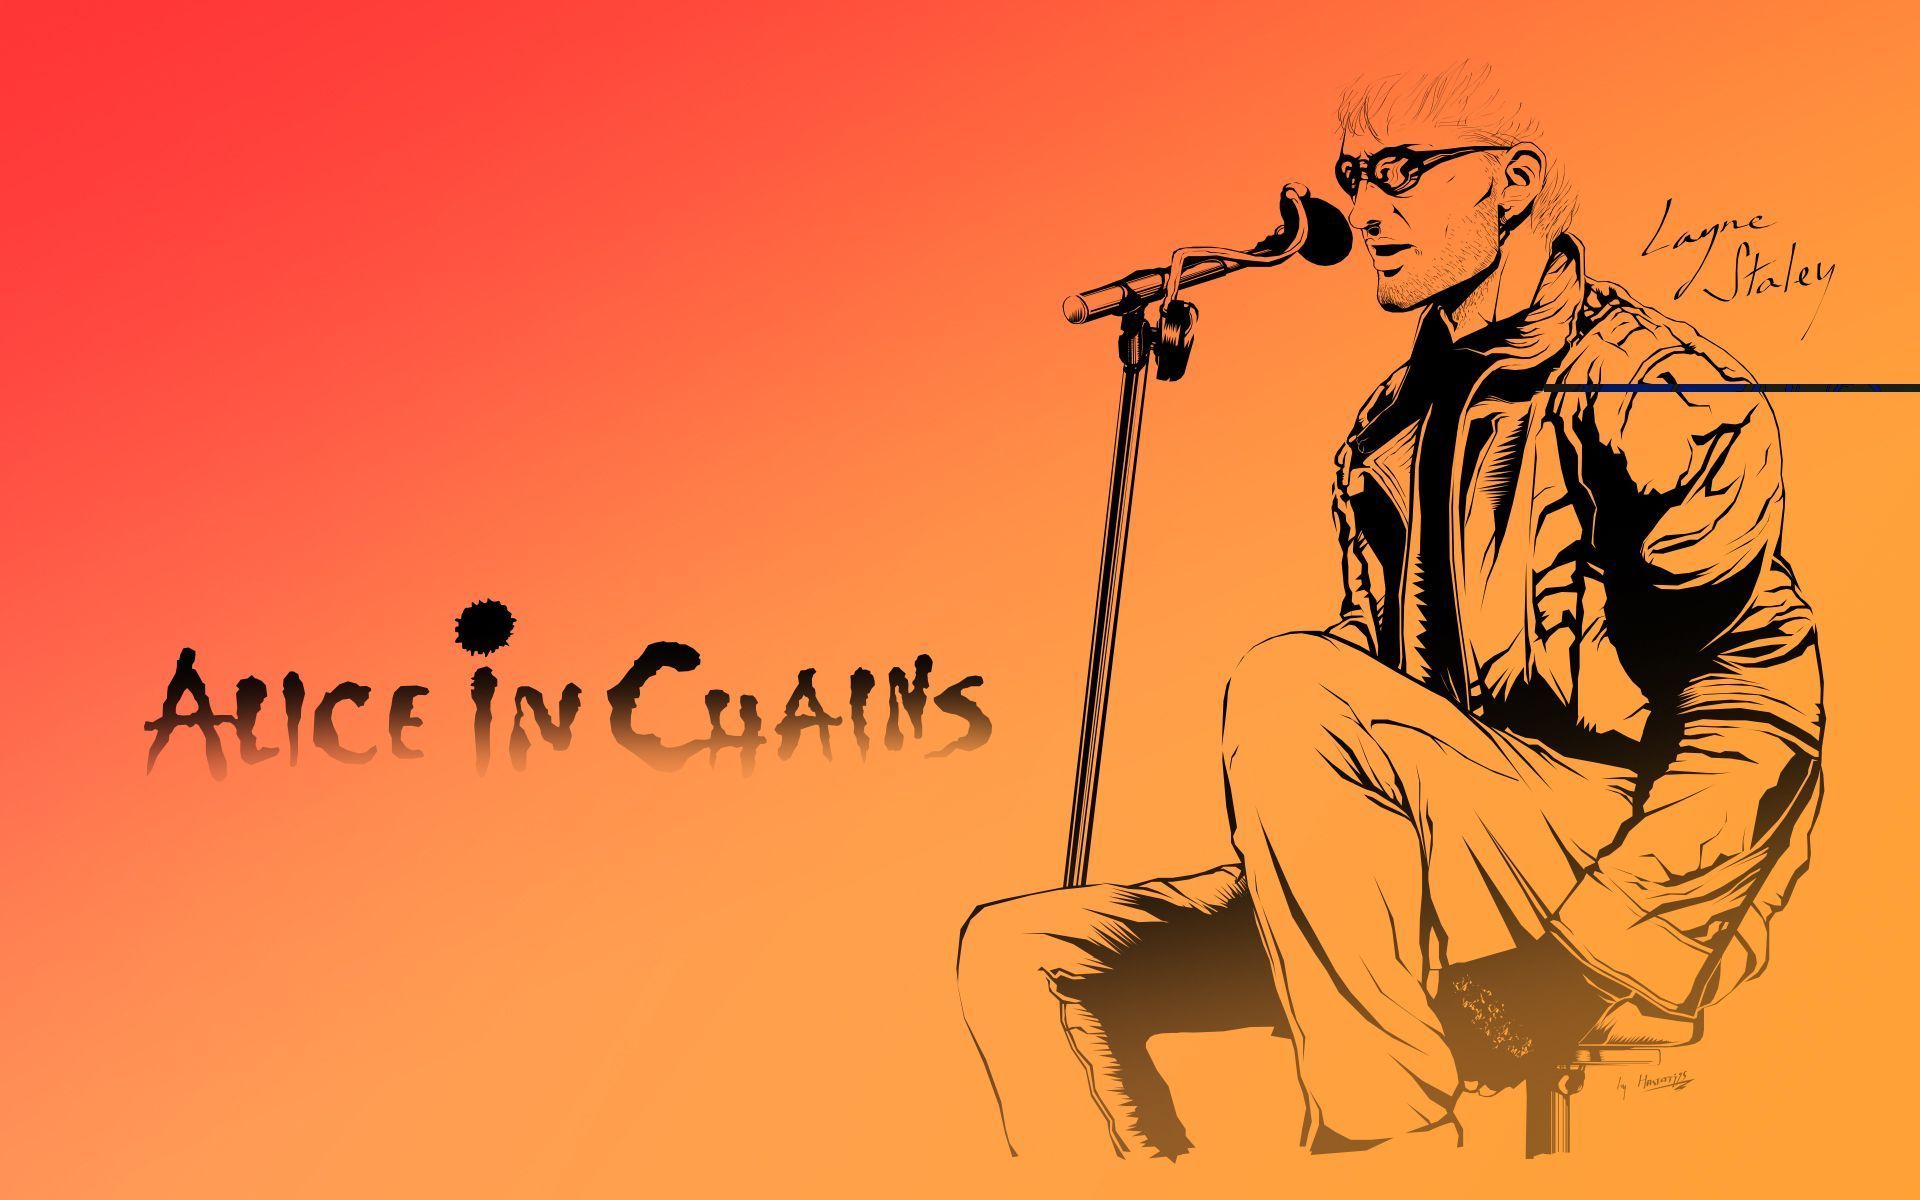 Layne Staley Wallpaper. Alice in chains, Layne staley, Alice